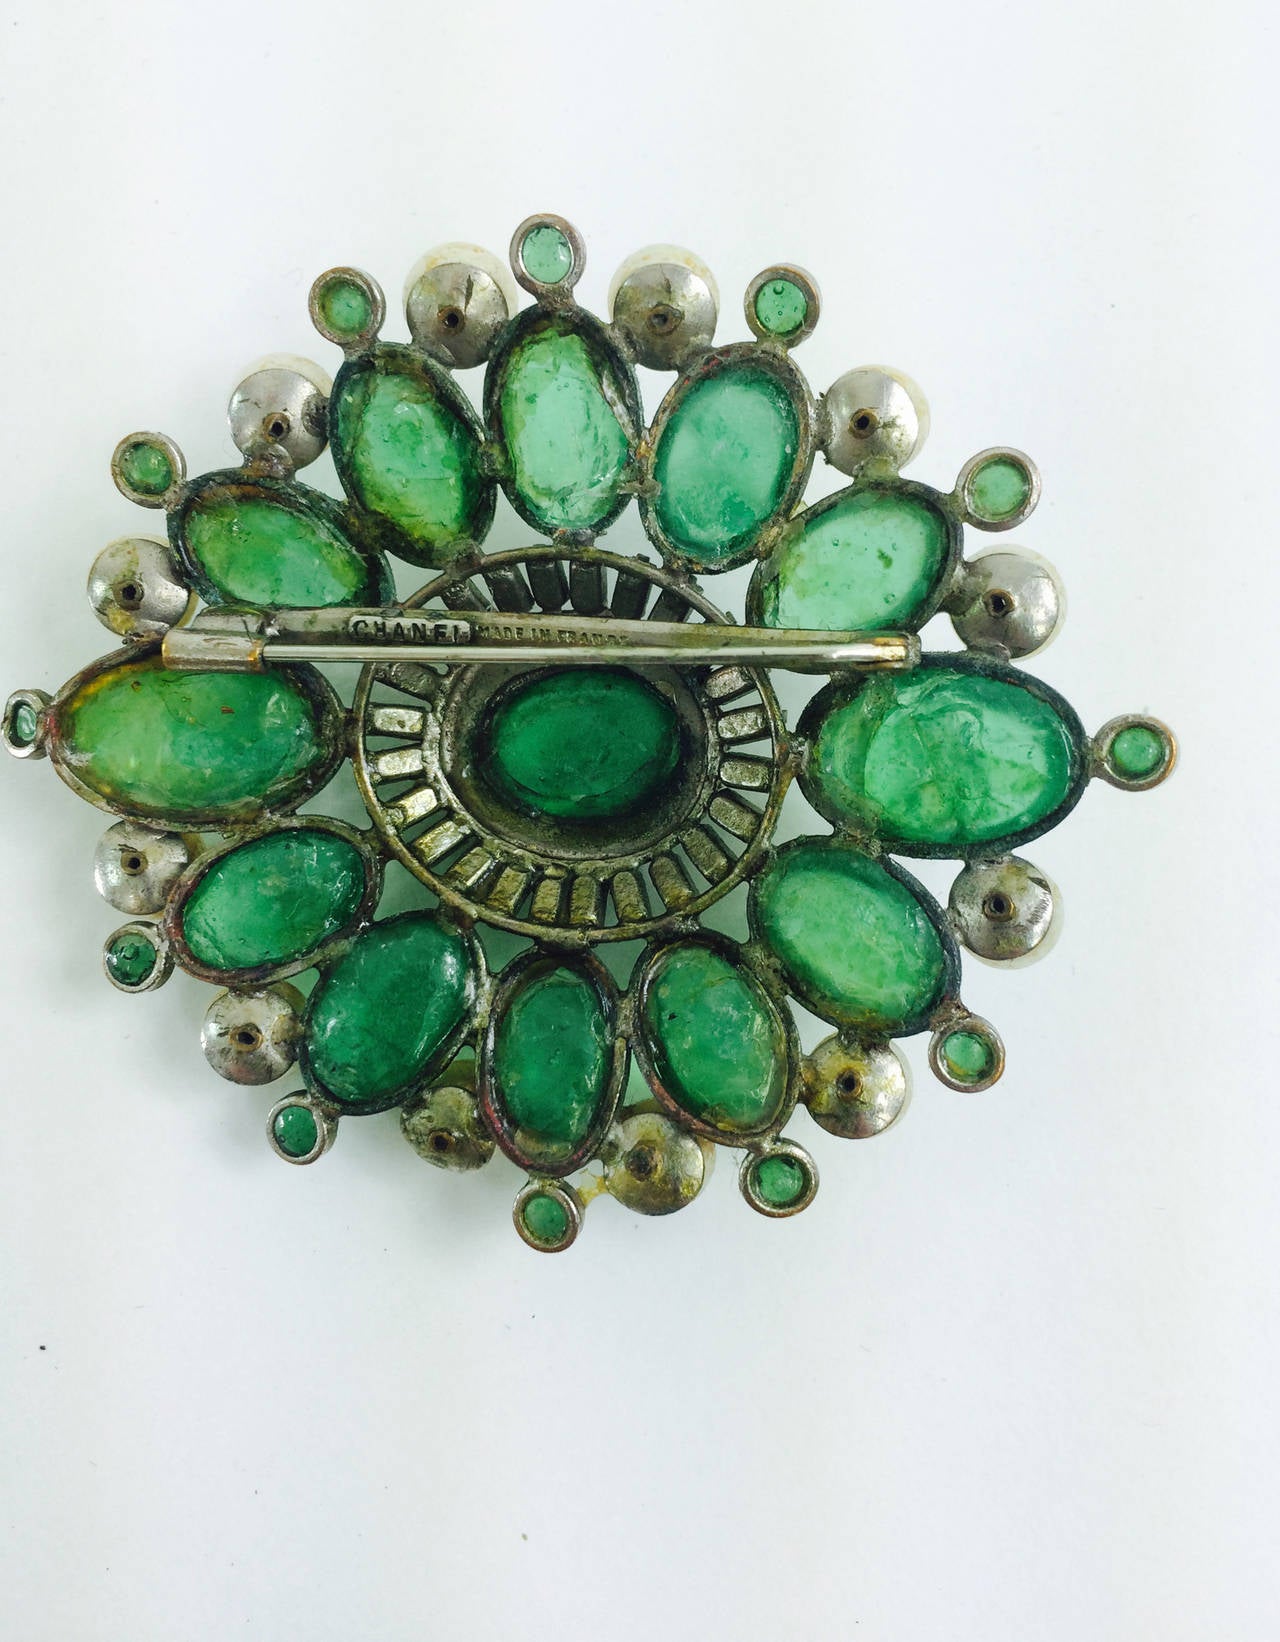 Classic brooch in Chanel style hand-embroidered - Crealandia